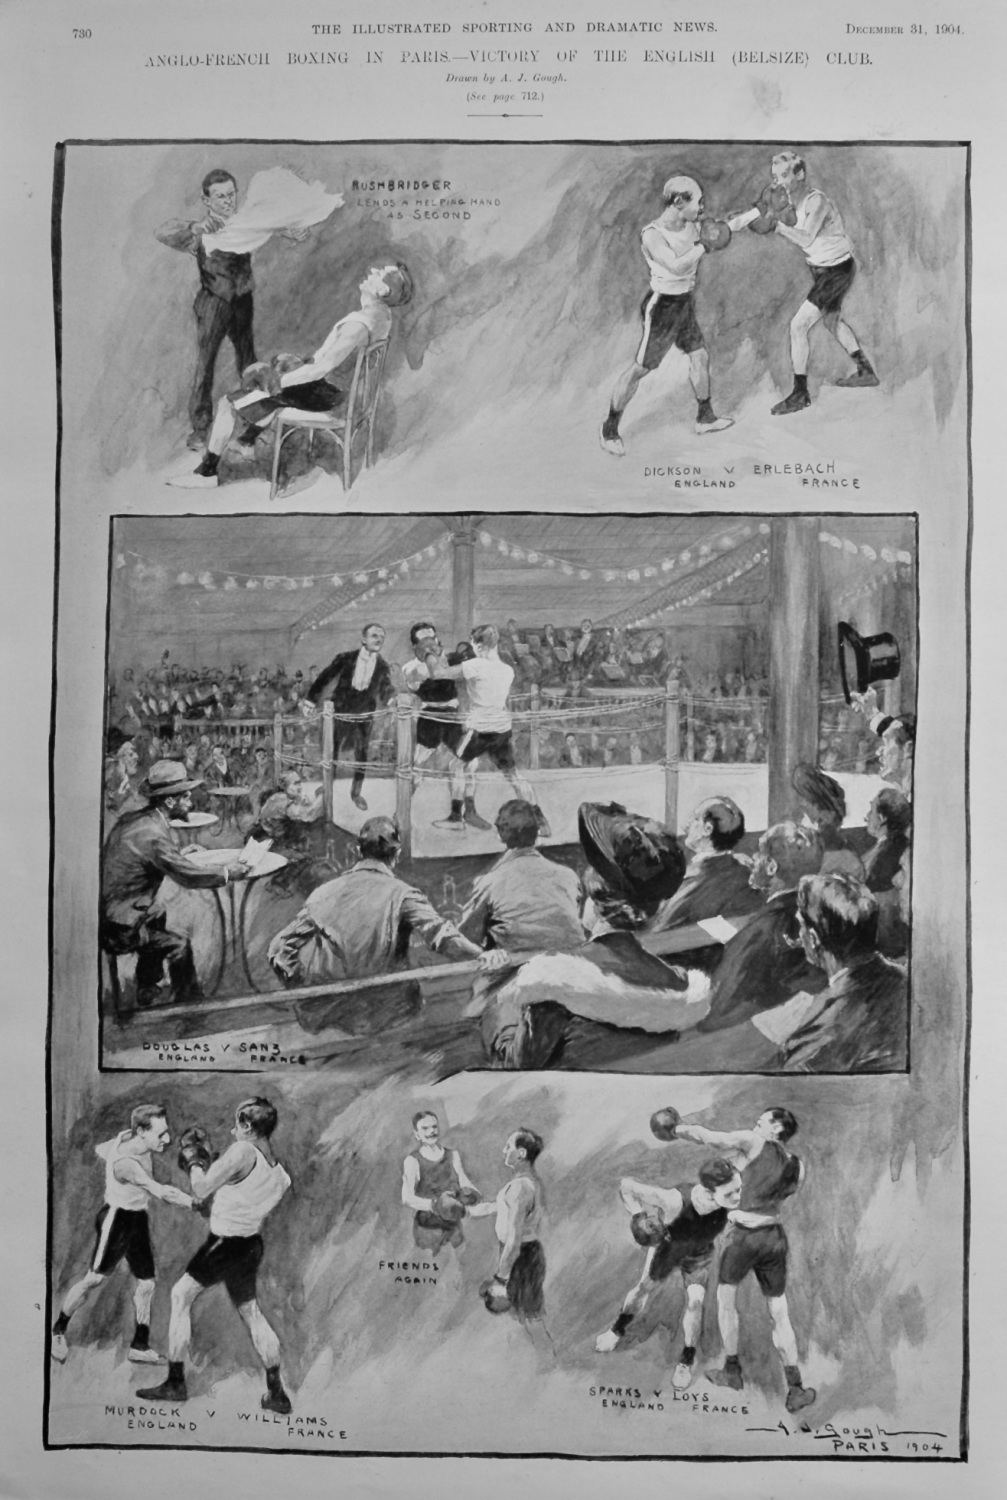 Anglo-French Boxing in Paris.- Victory of the English (Belsize) Club. 1904.